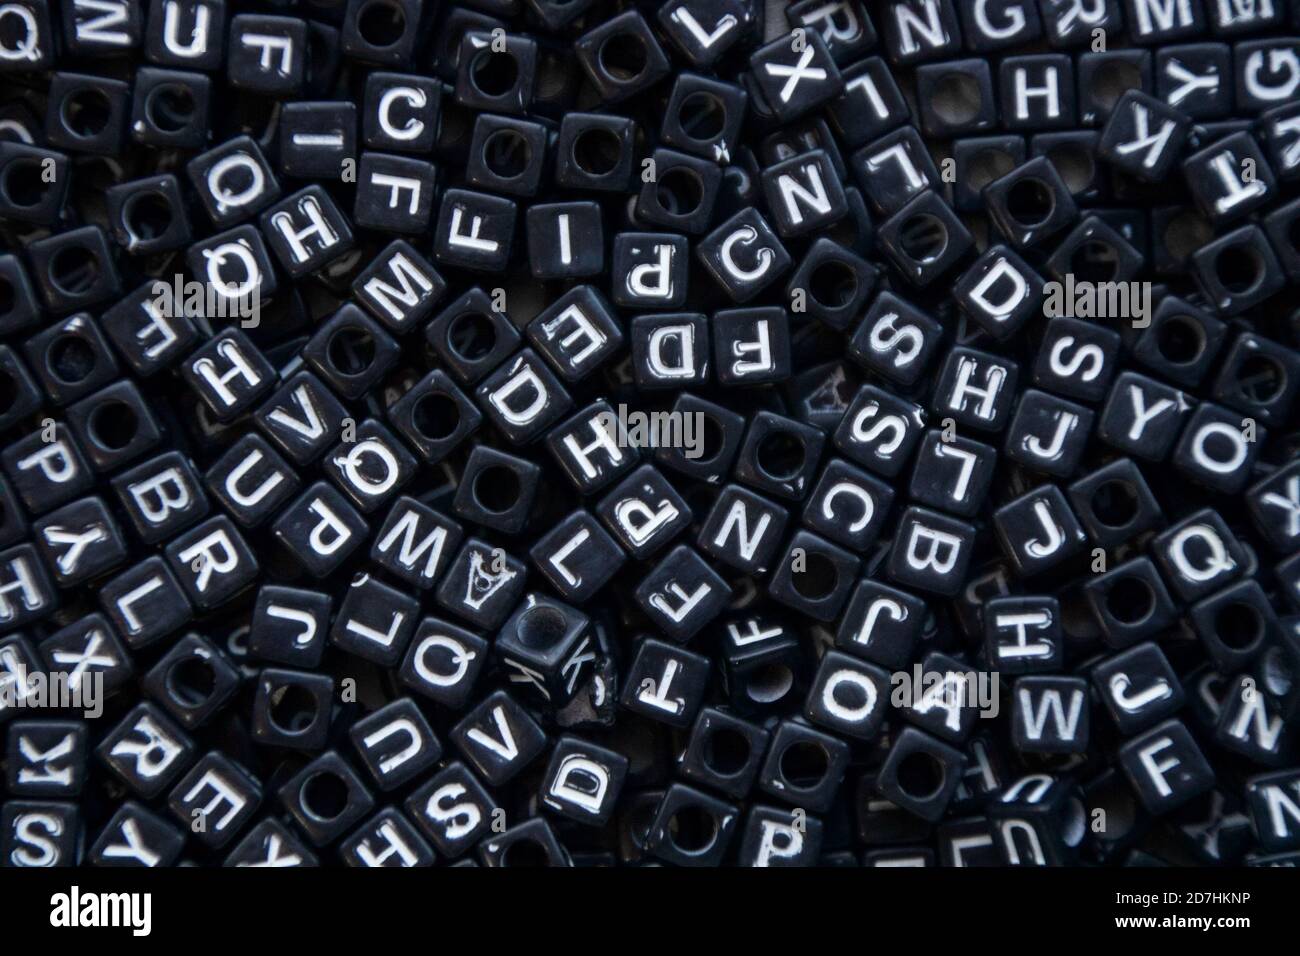 Cluster of black cube-shaped beads with white letters. Stock Photo